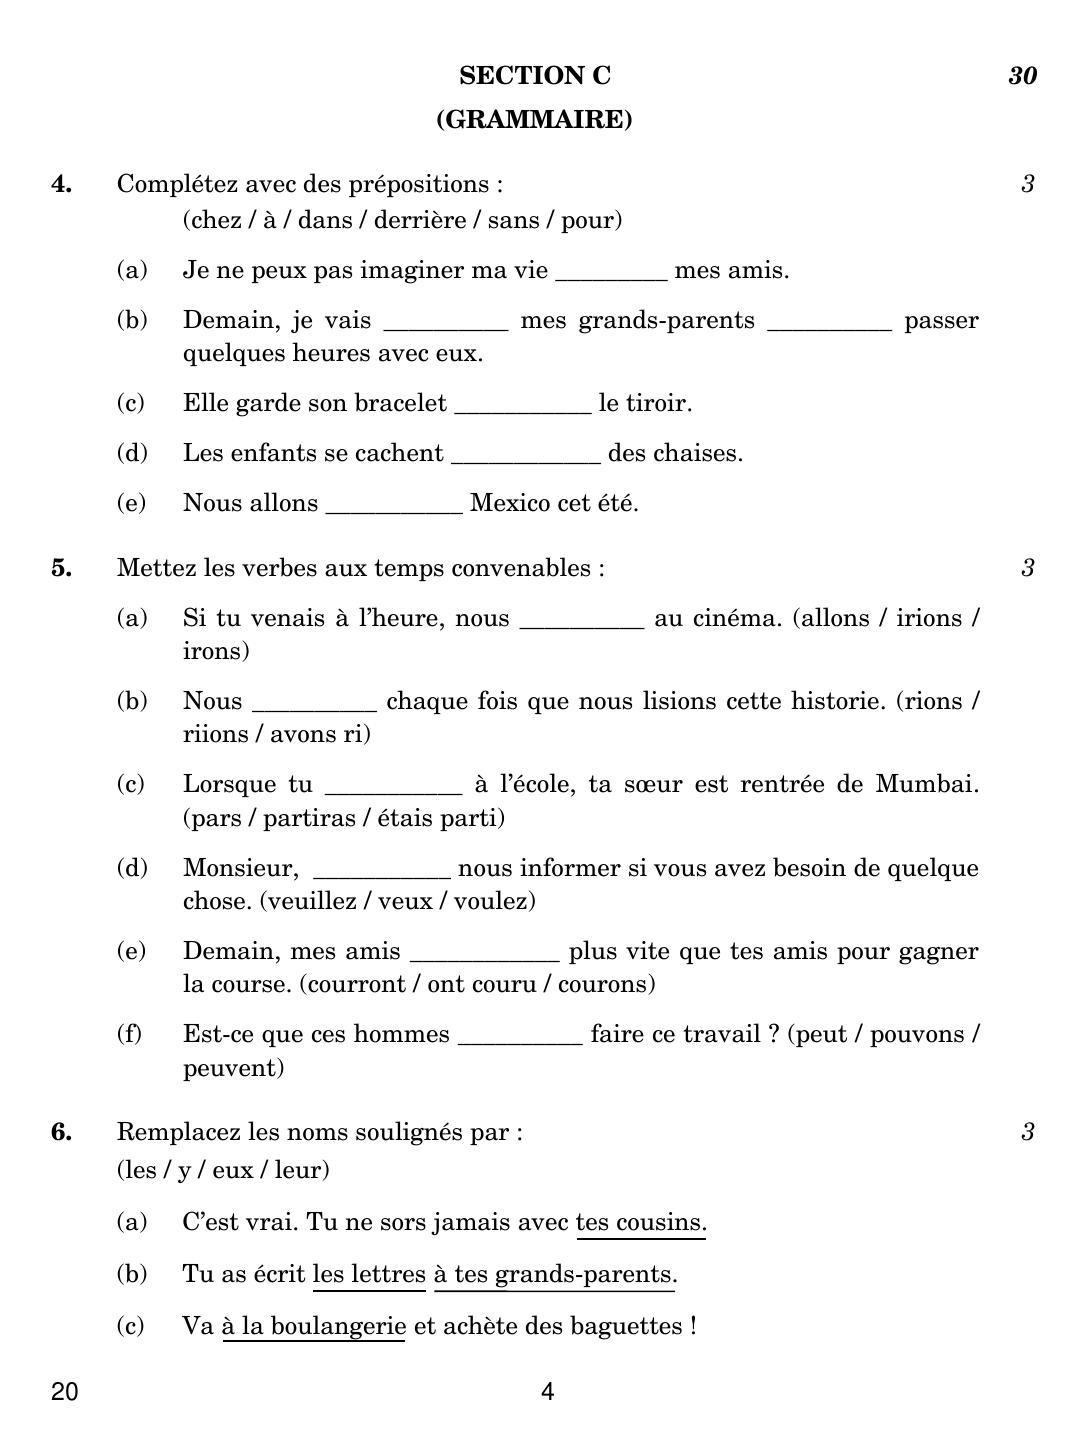 CBSE Class 10 20 French 2019 Compartment Question Paper - Page 4